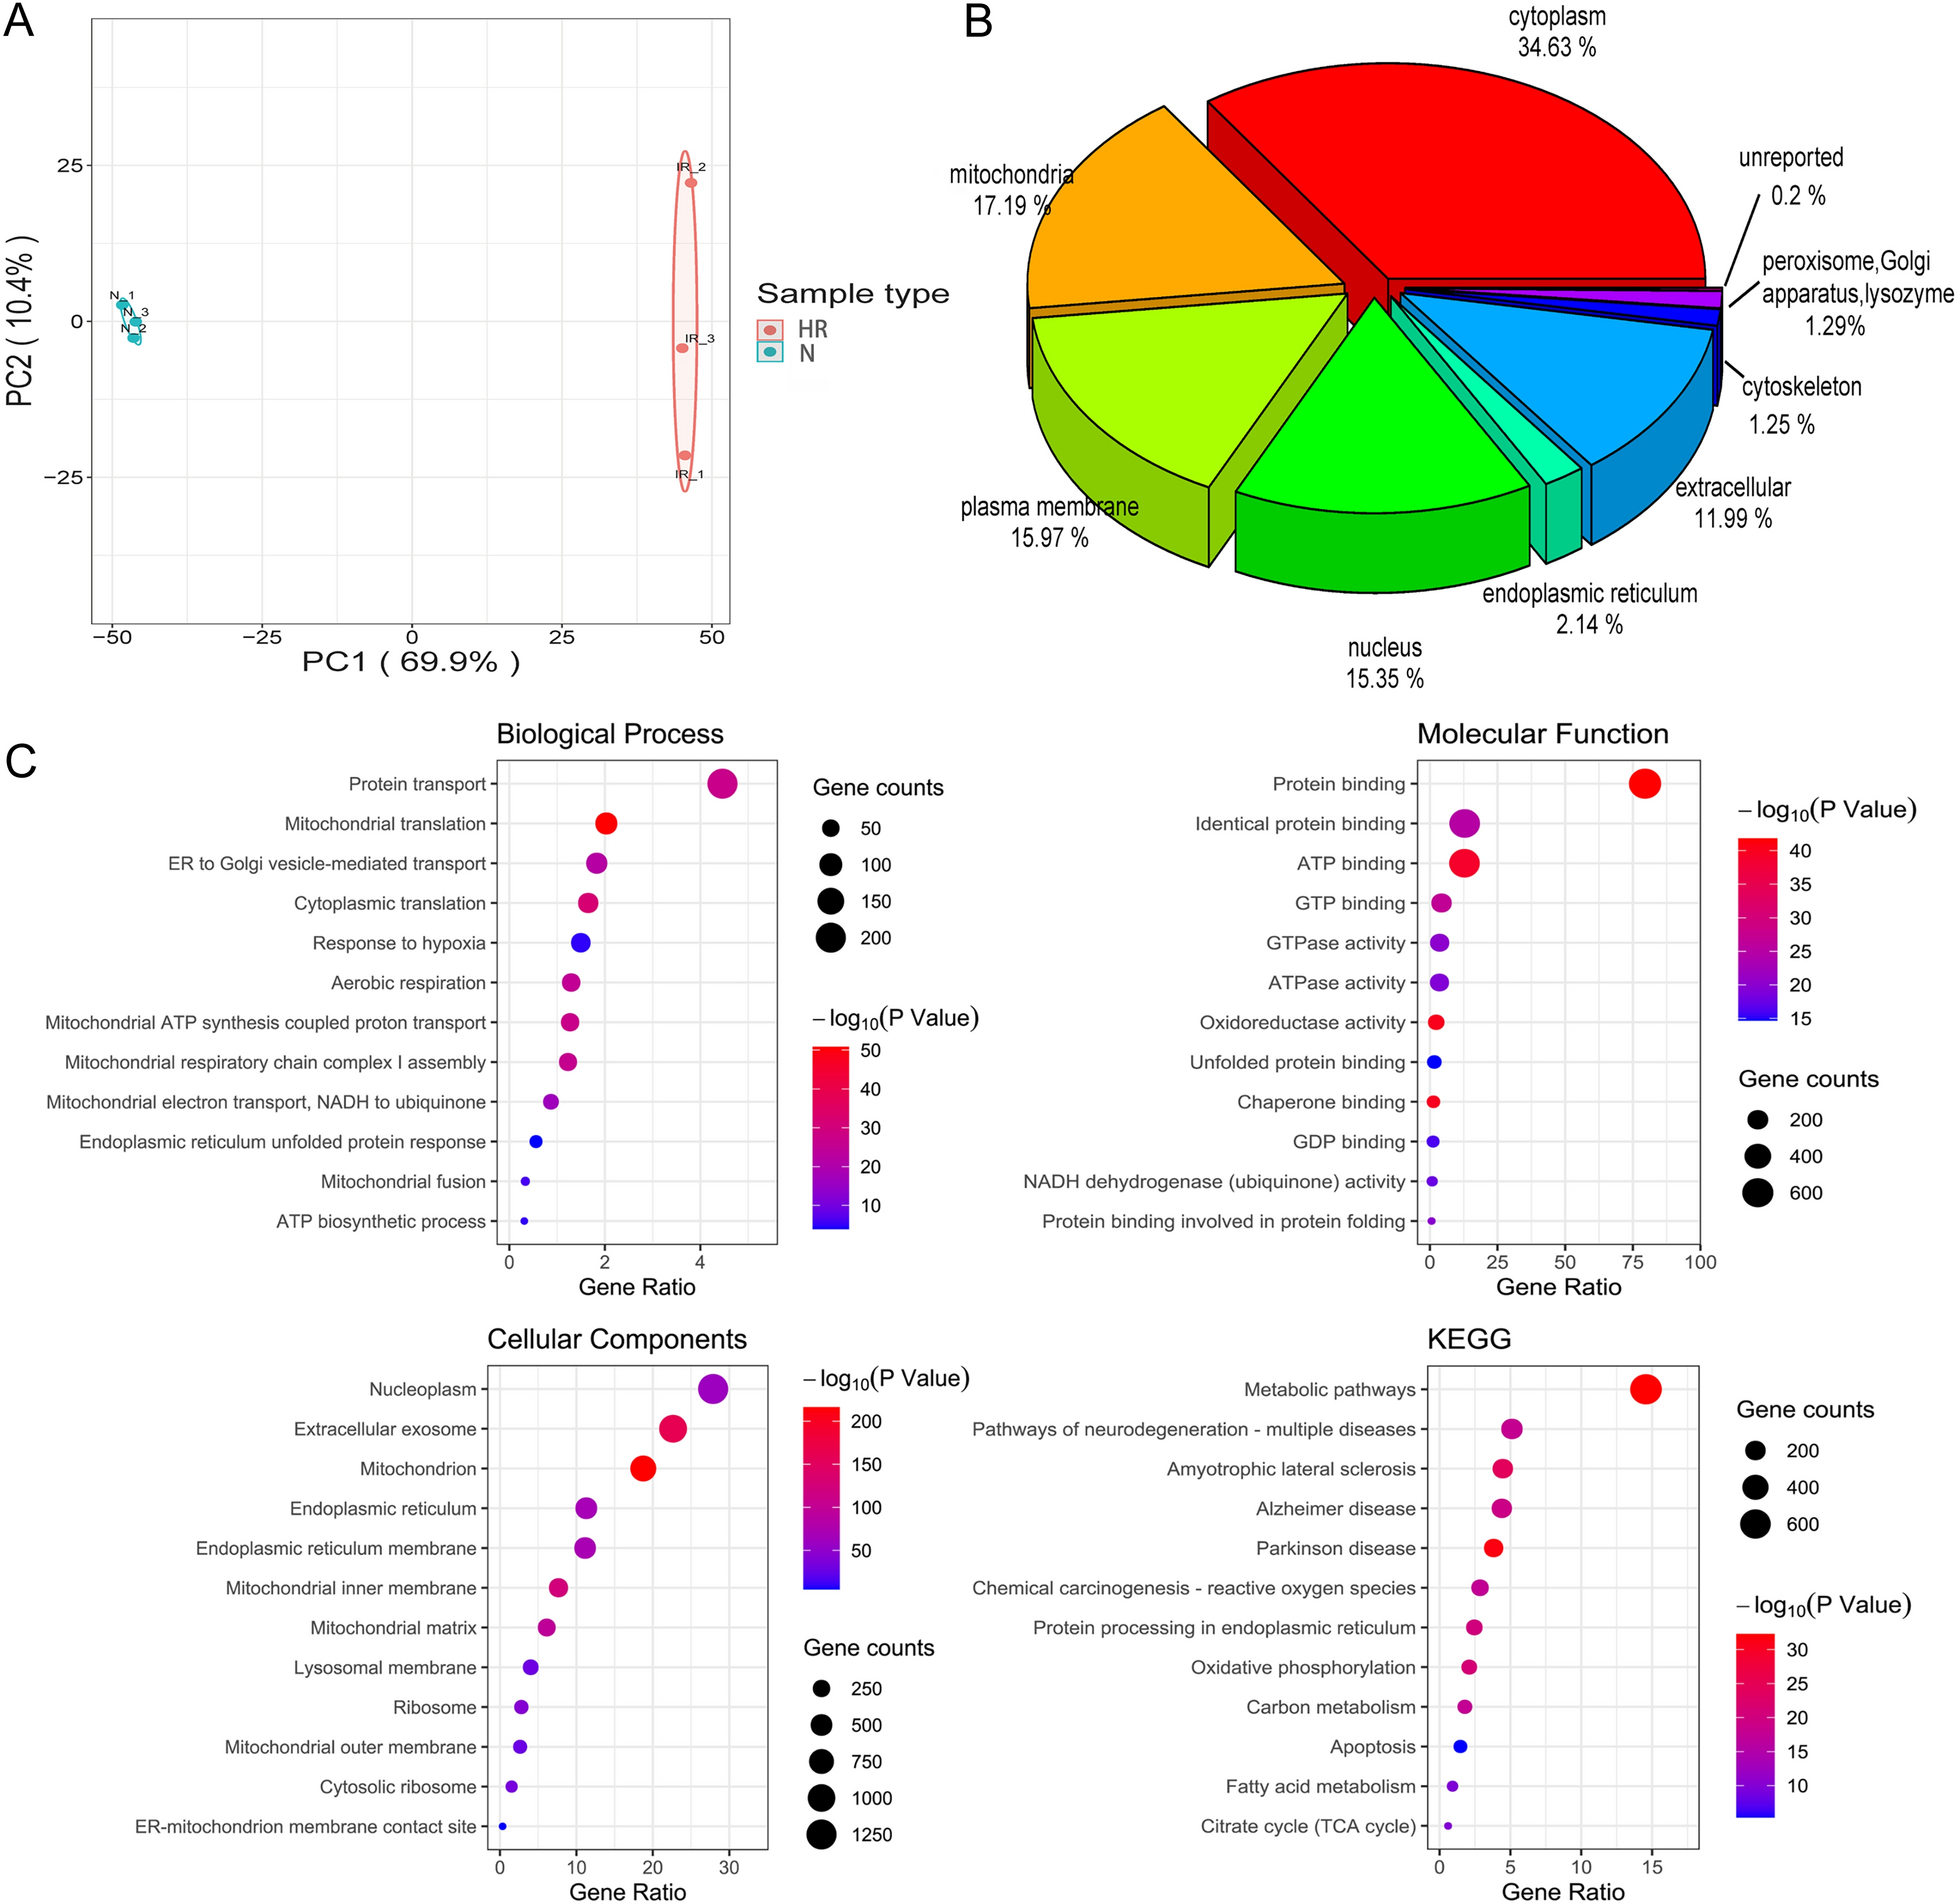 Proteomic analysis of mitochondria associated membranes in renal ischemic reperfusion injury